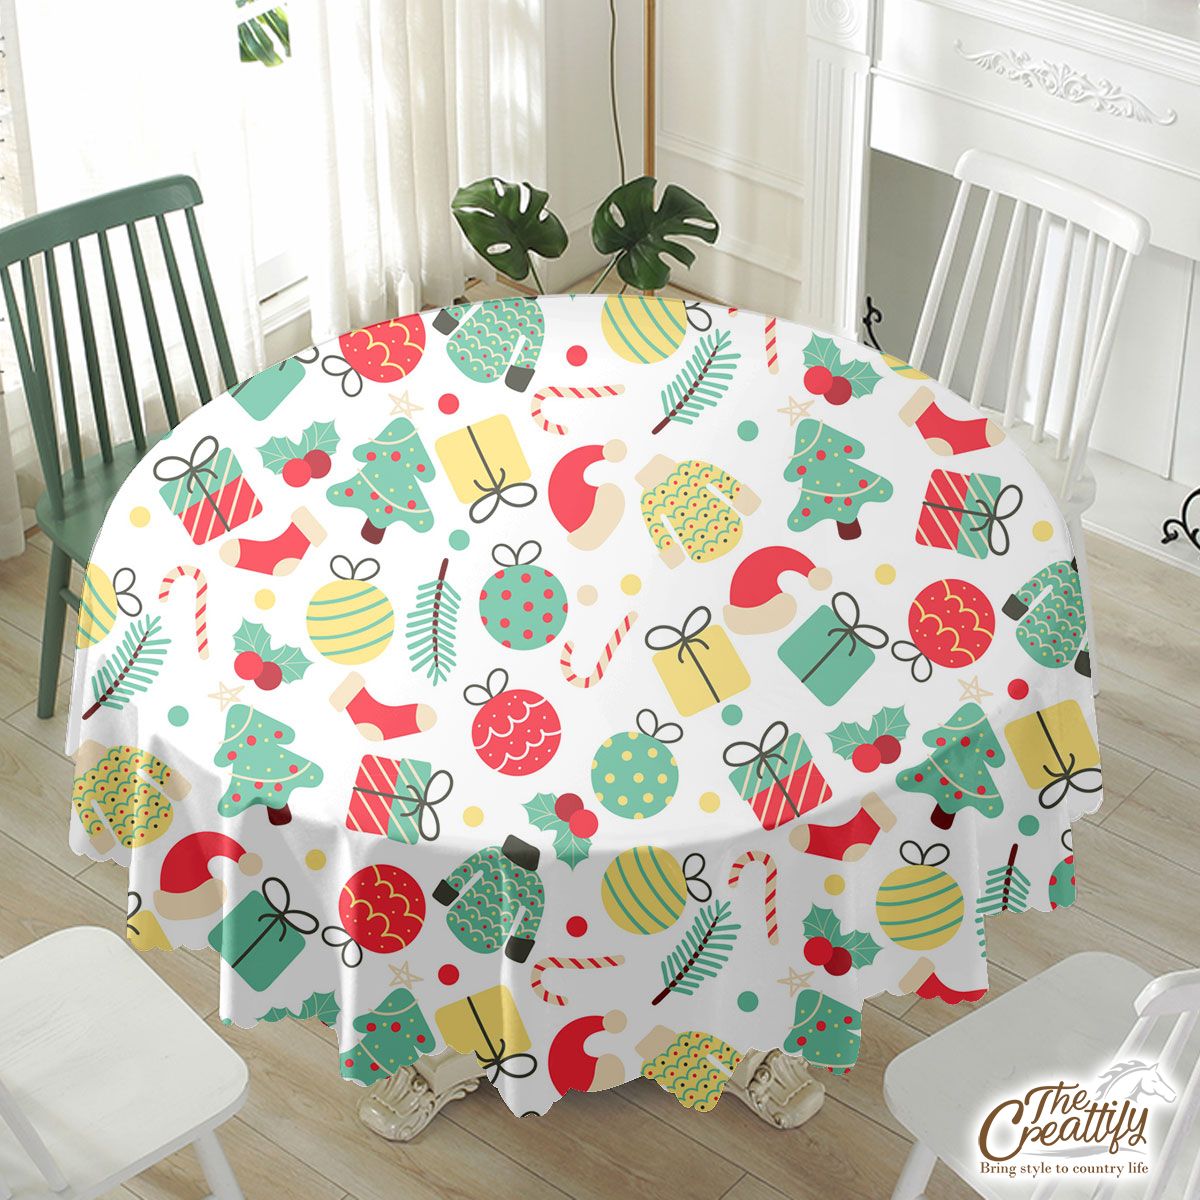 Christmas Gifts, Balls, Santa Hat, Red Socks, Candy Canes, Pattern Waterproof Tablecloth